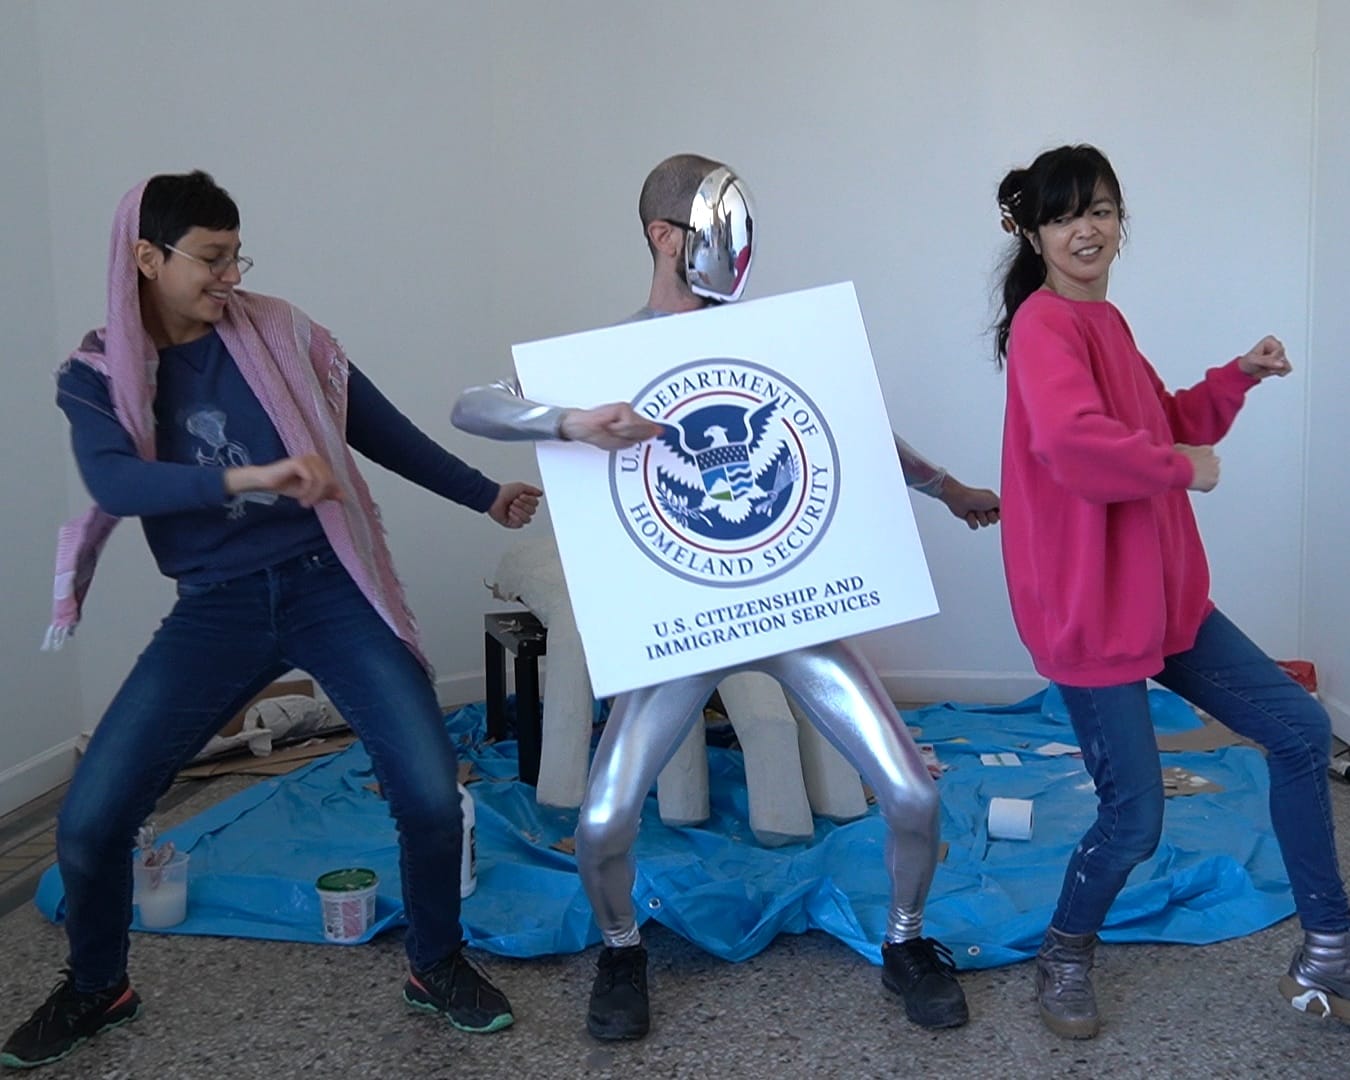 Three people dancing in sync. The middle is wearing a silver unitard, silver mask, and a USCIS logo.